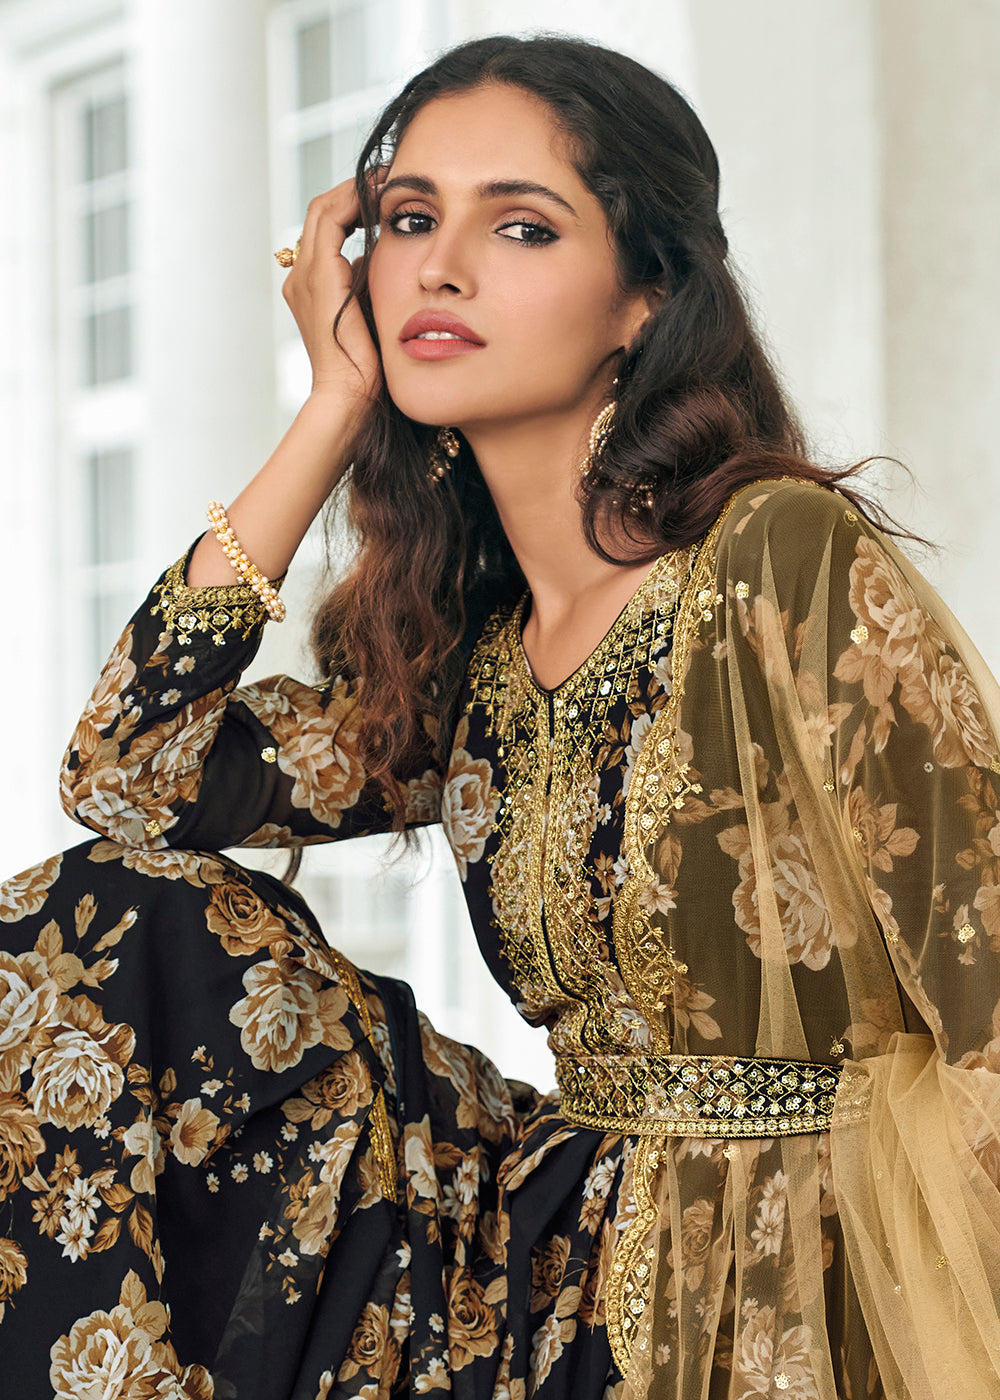 Shop Now Floral Printed Royal Black Trendy Sharara Suit for Wedding Online at Empress Clothing in USA, UK, Canada & Worldwide.